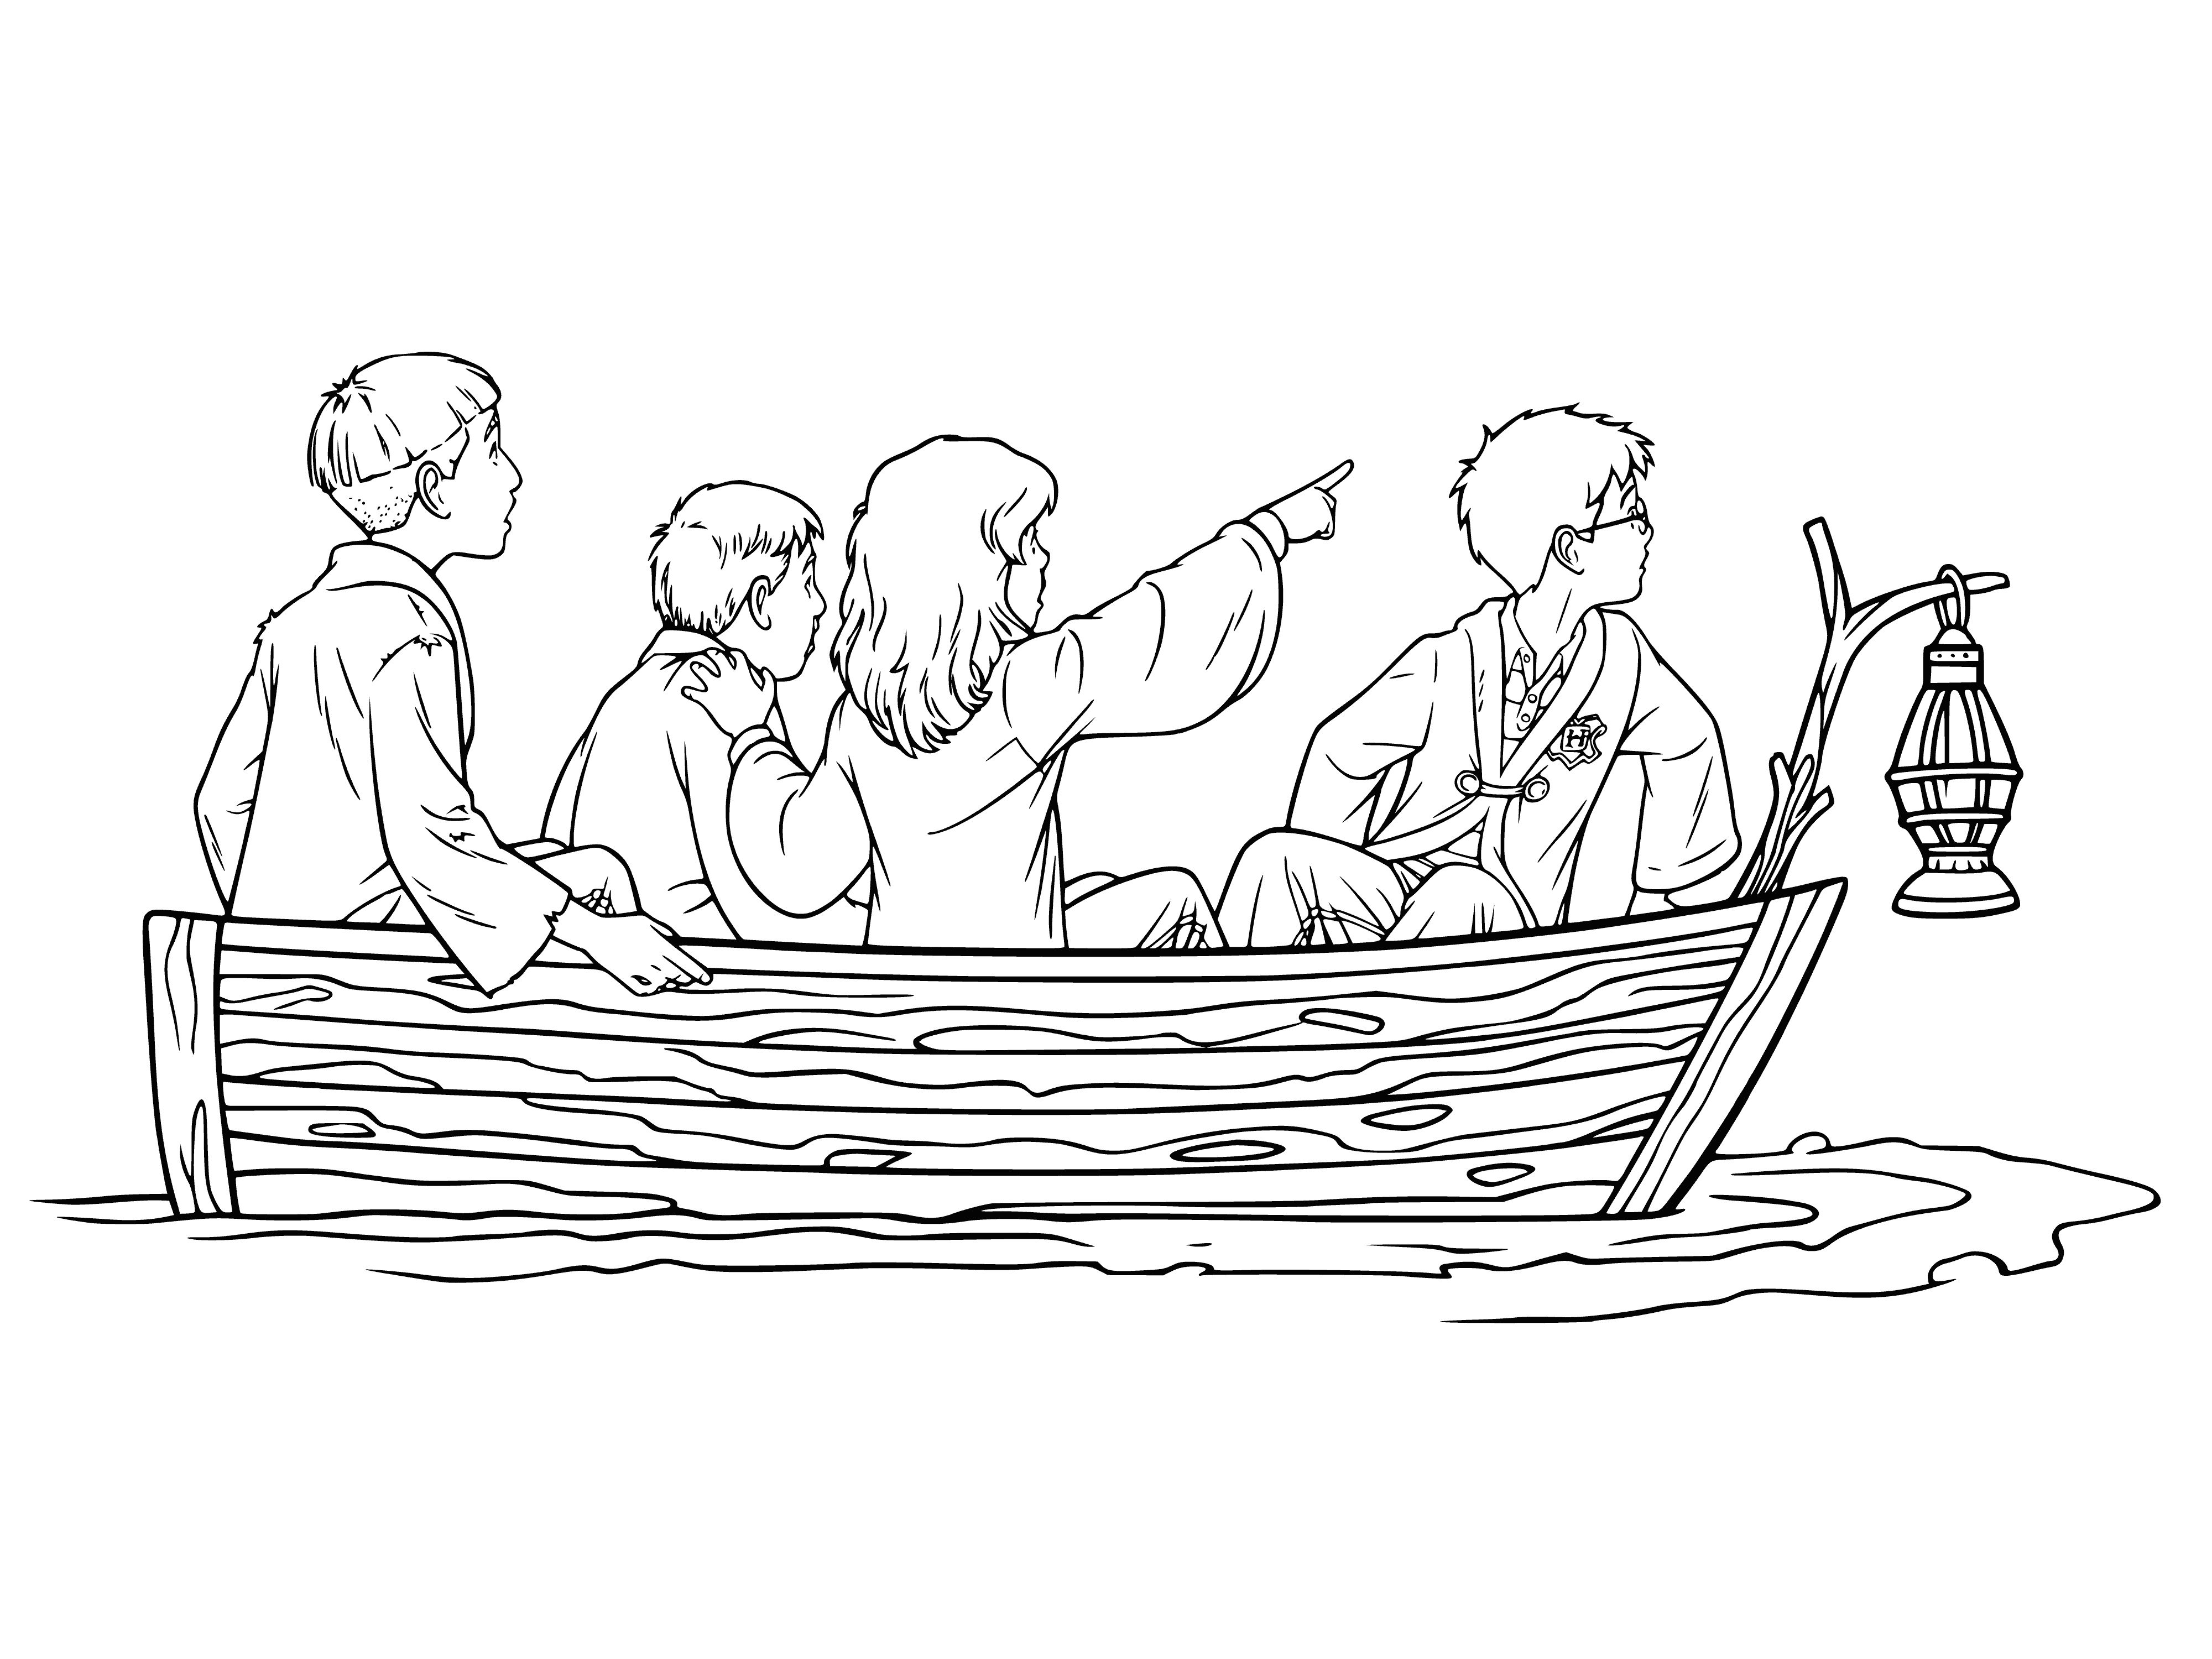 Children in the boat coloring page